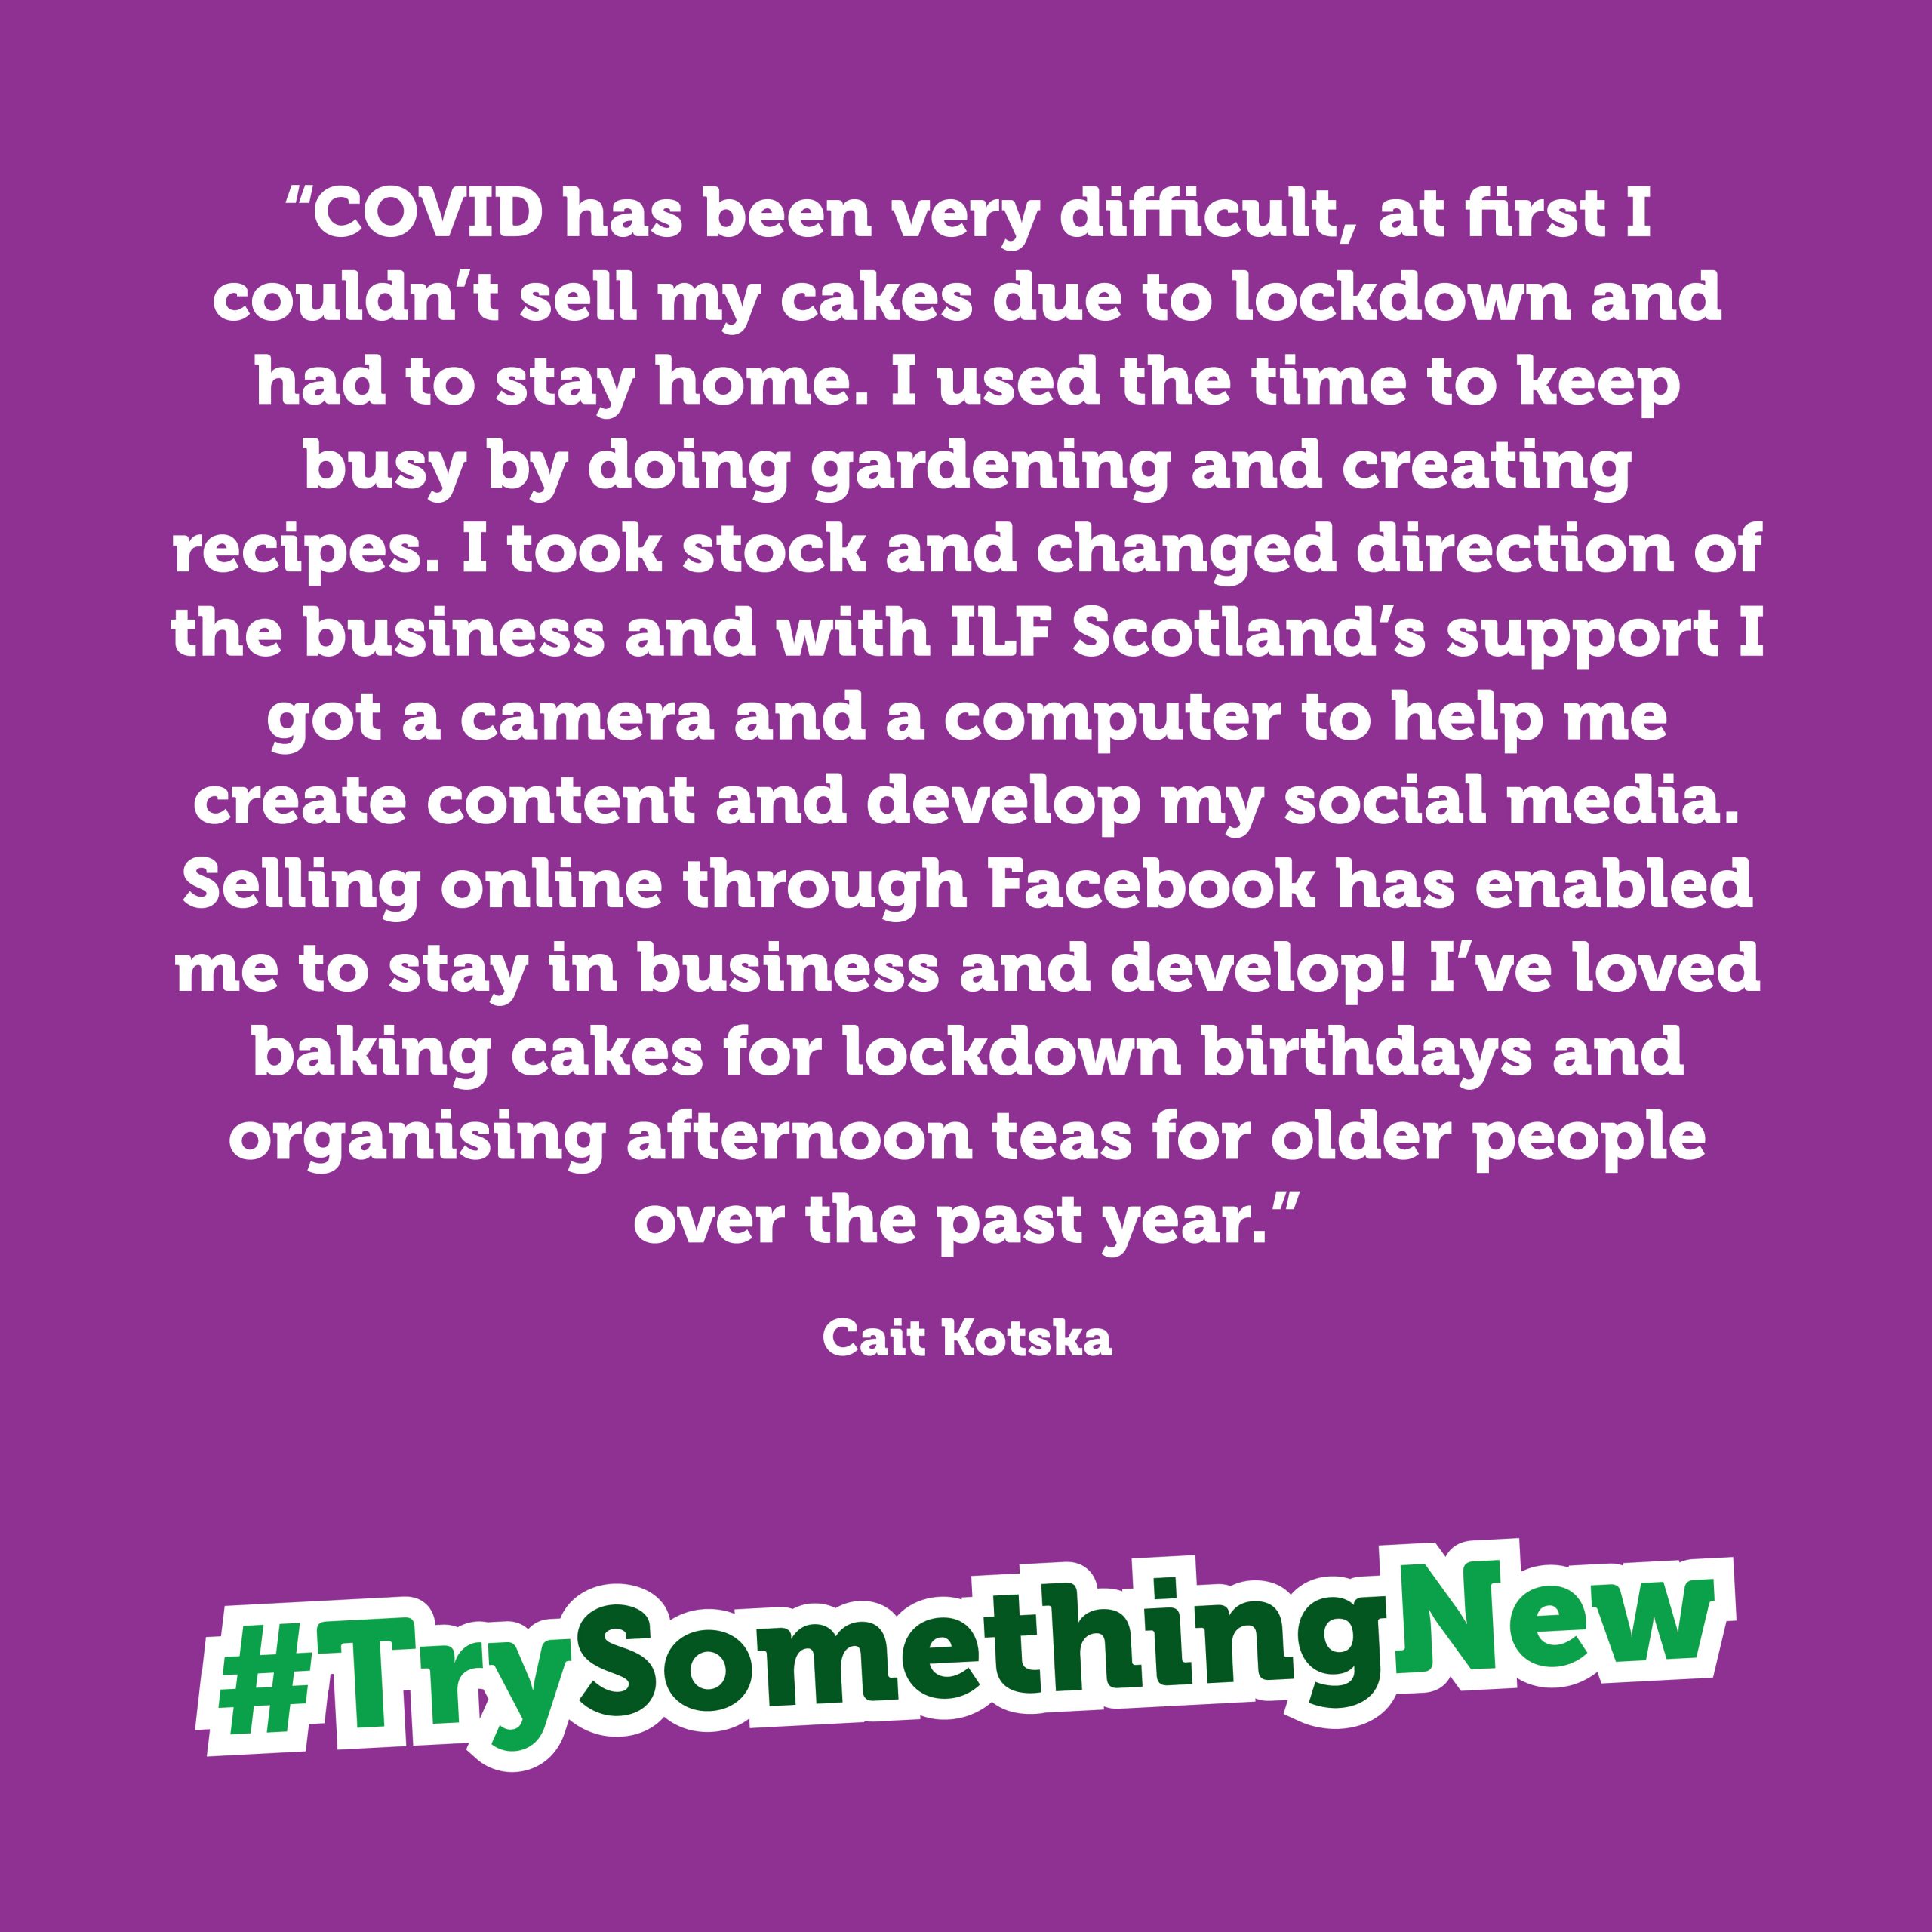 Purple box with the quote: "COVID has been very difficult. At first, I couldn't sell my cakes due to lockdown and had to stay home. I used the time to keep busy by doing gardening and creating recipes. I took stock and changed direction of the business and with ILF Scotland's support I got a camera and a computer to help me create content and develop my social media. Selling online, through Facebook, has enabled me to stay in business and develop! I've loved baking cakes for lockdown birthdays and organising afternoon teas for older people over the past year." Cait Koska. The box finishes with the hashtag #TrySomethingNew
